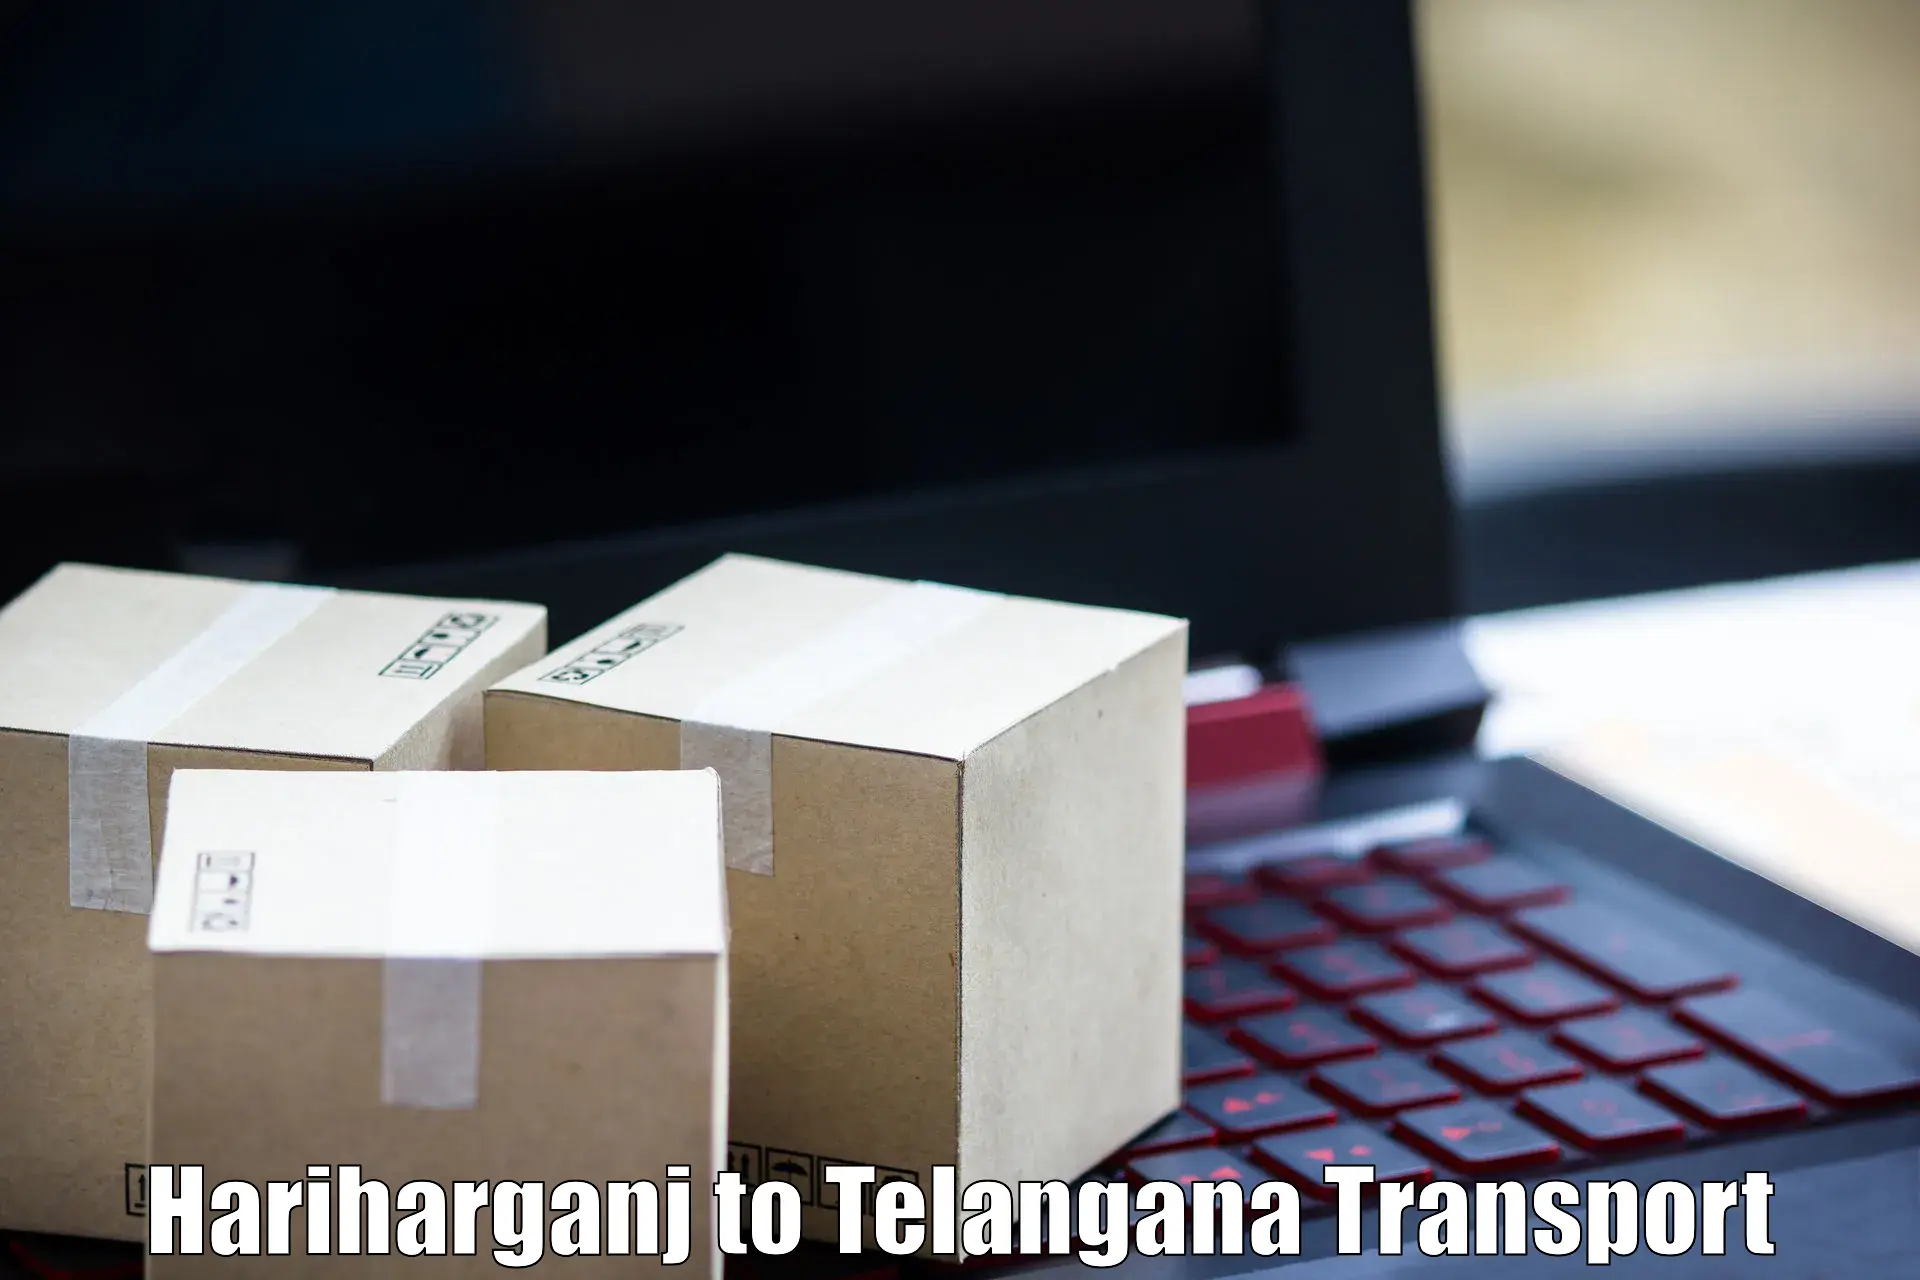 Interstate transport services in Hariharganj to Bhainsa